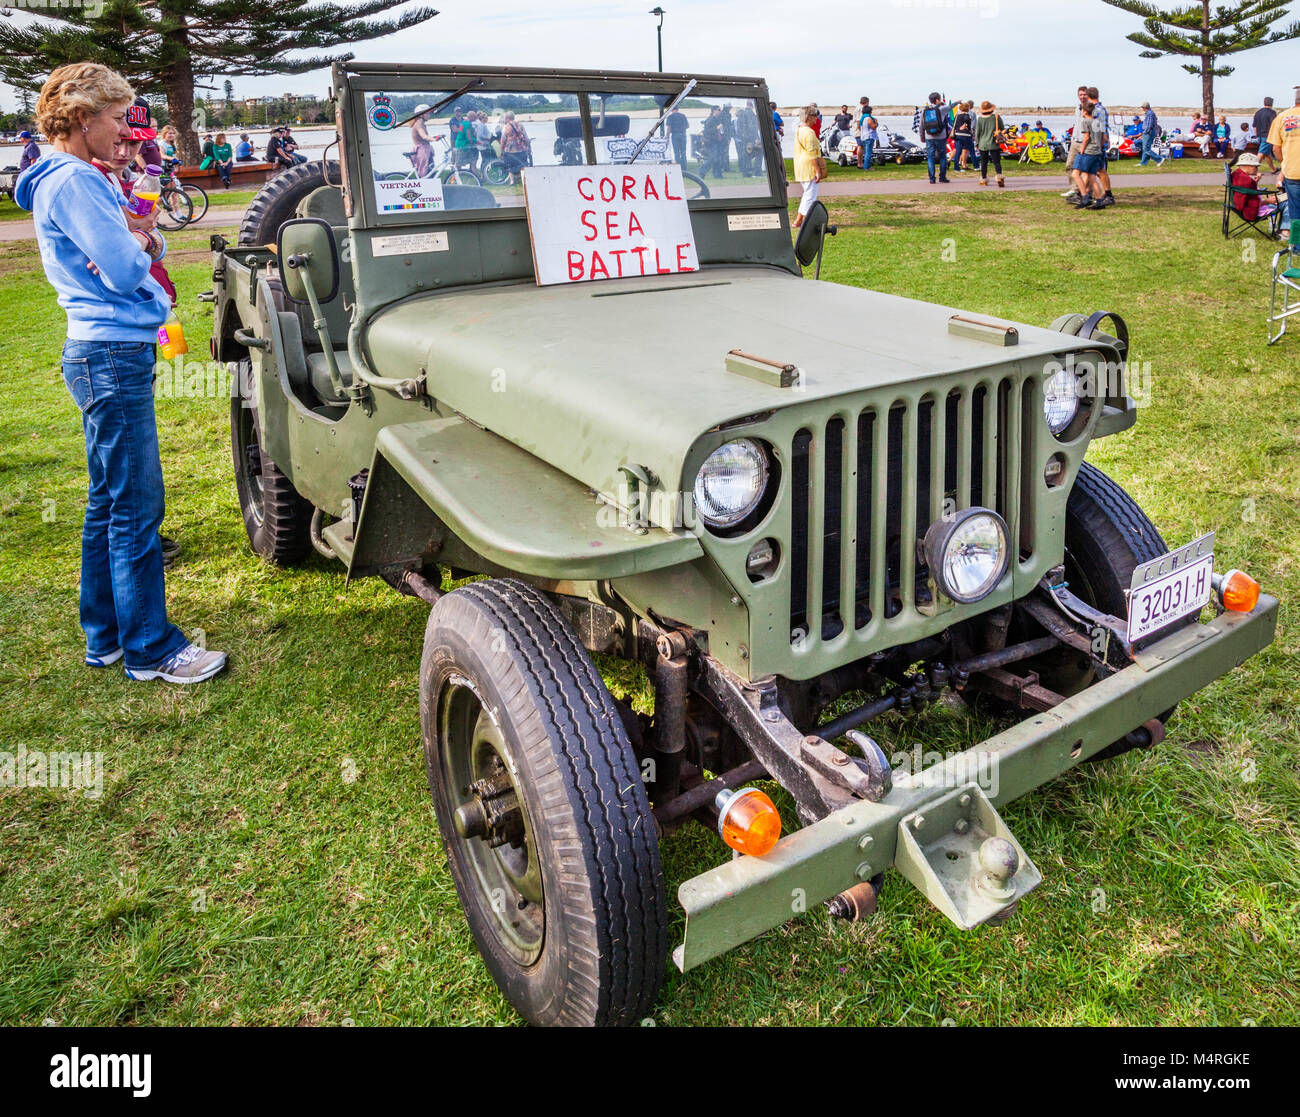 14 1029, Australia, New South Wales, Central Coast, The Entrance, vintage World War II Willys MB military jeep, exhibited during the Central Coast His Stock Photo